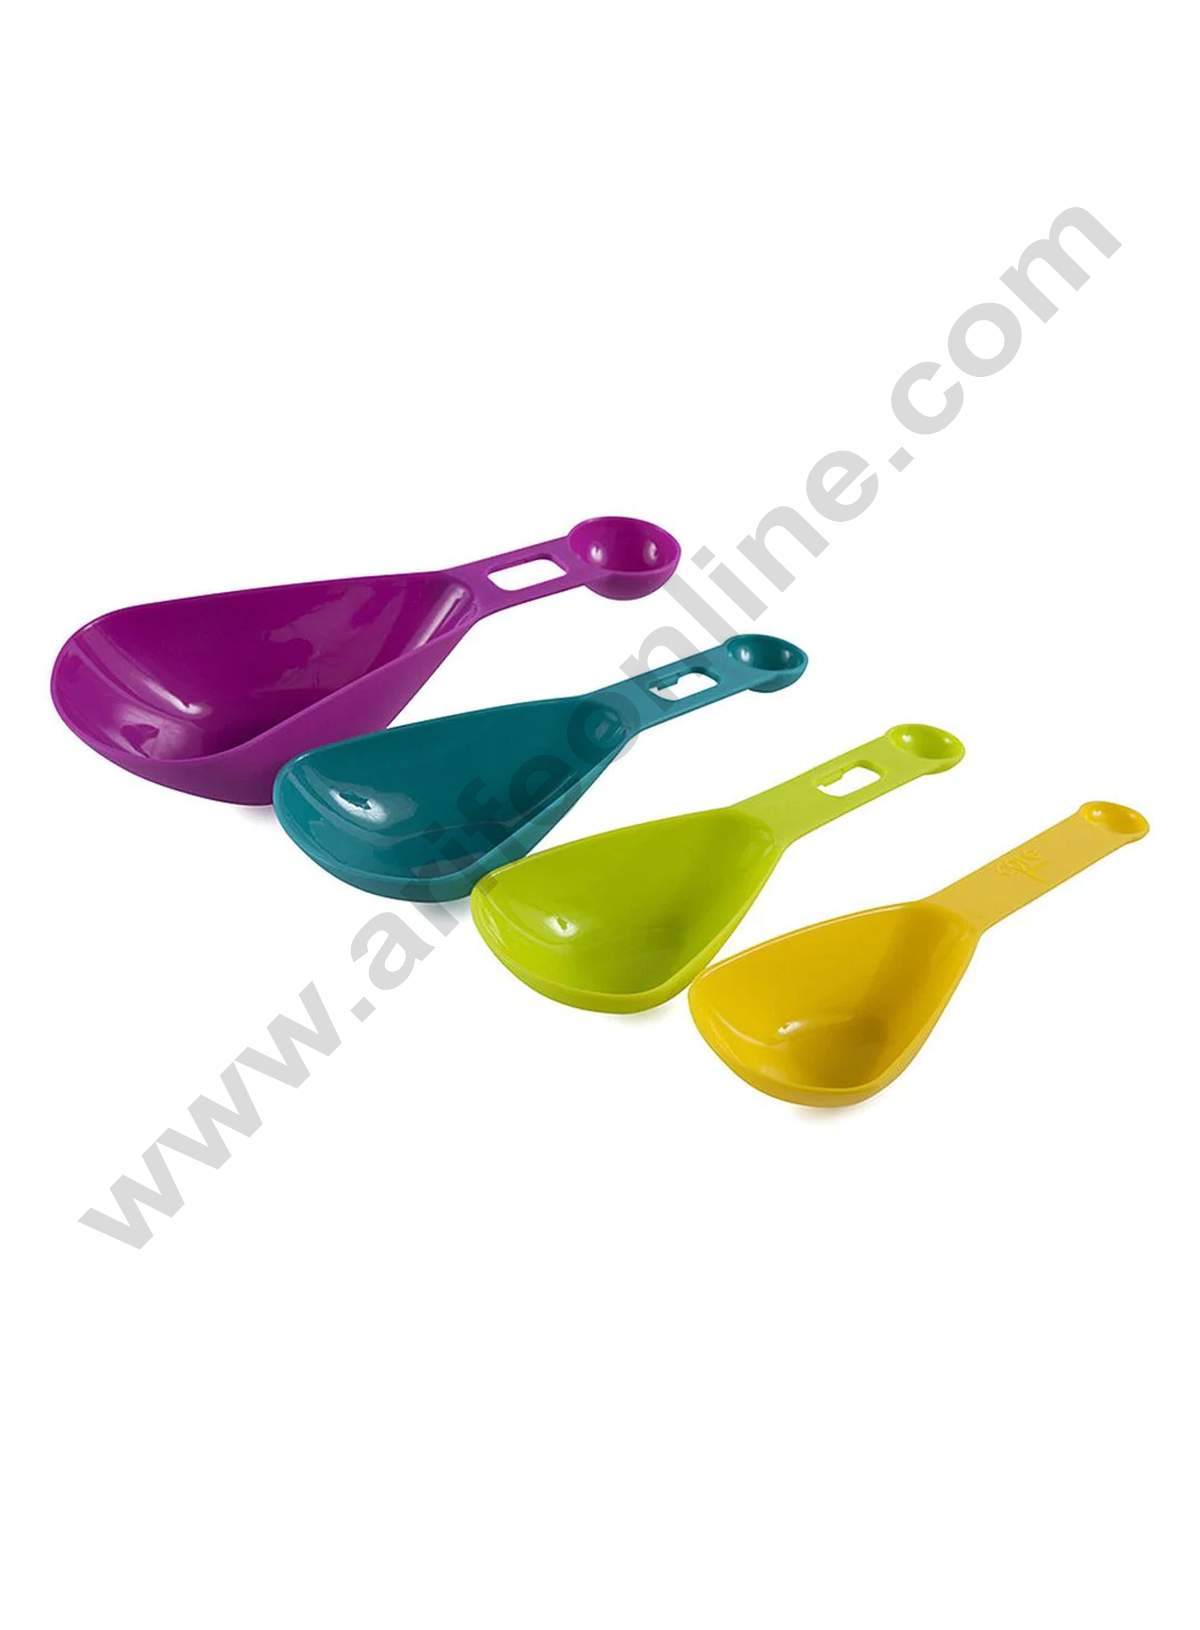 Cake Decor 4 Pieces Plastic Red Measuring Cups For Measurements SBAC-C –  Arife Online Store